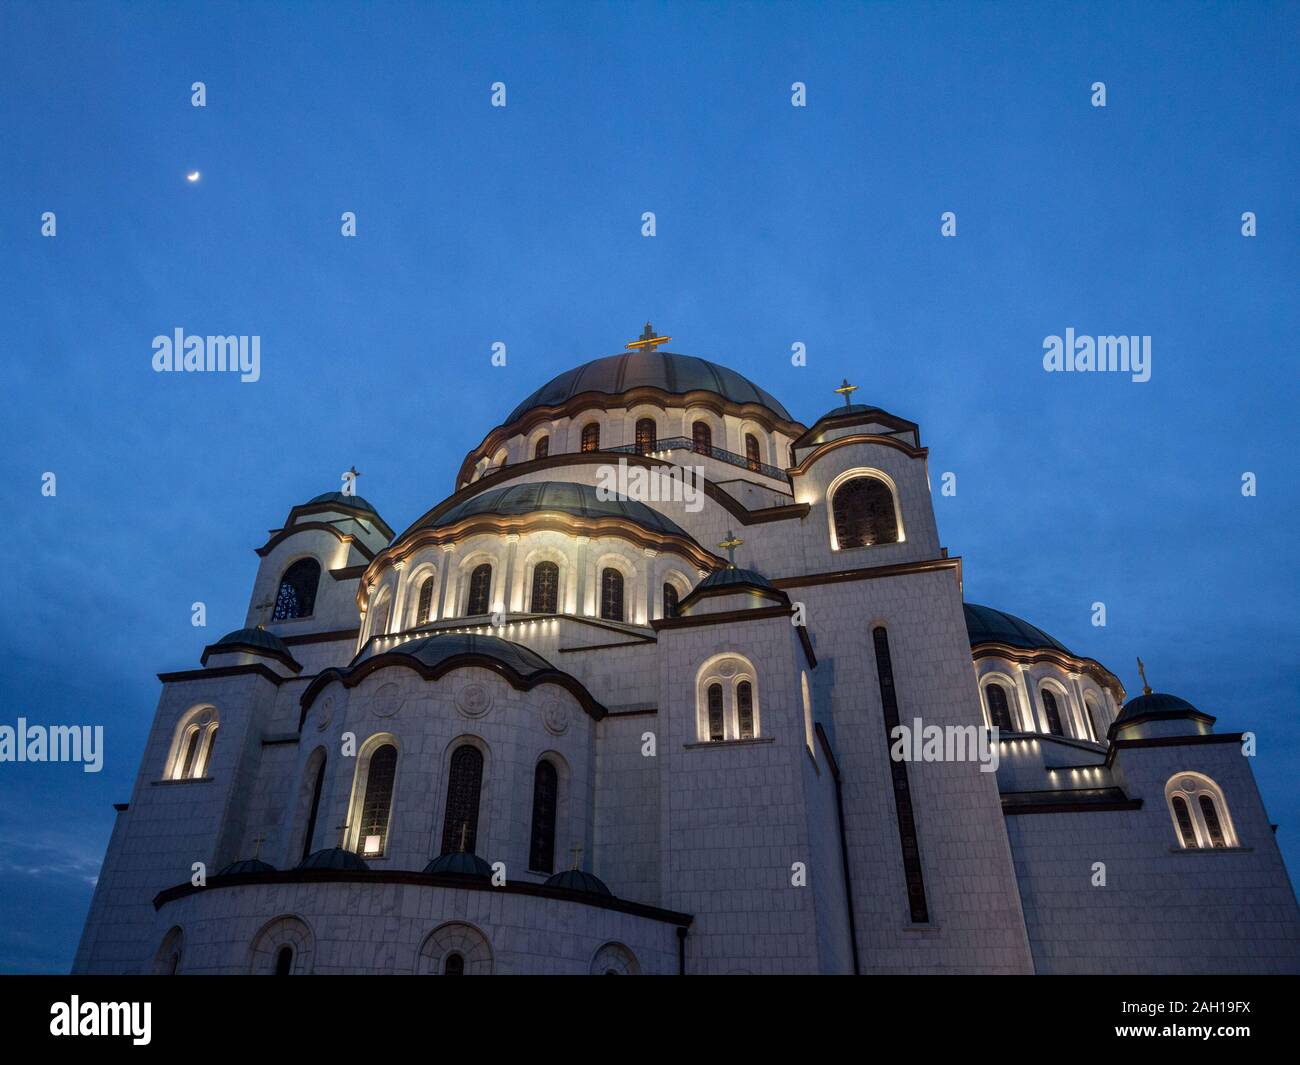 Saint Sava Cathedral Temple (Hram Svetog Save) in the early evening seen fron the outside. This orthodox church is one of the main monuments of the ca Stock Photo